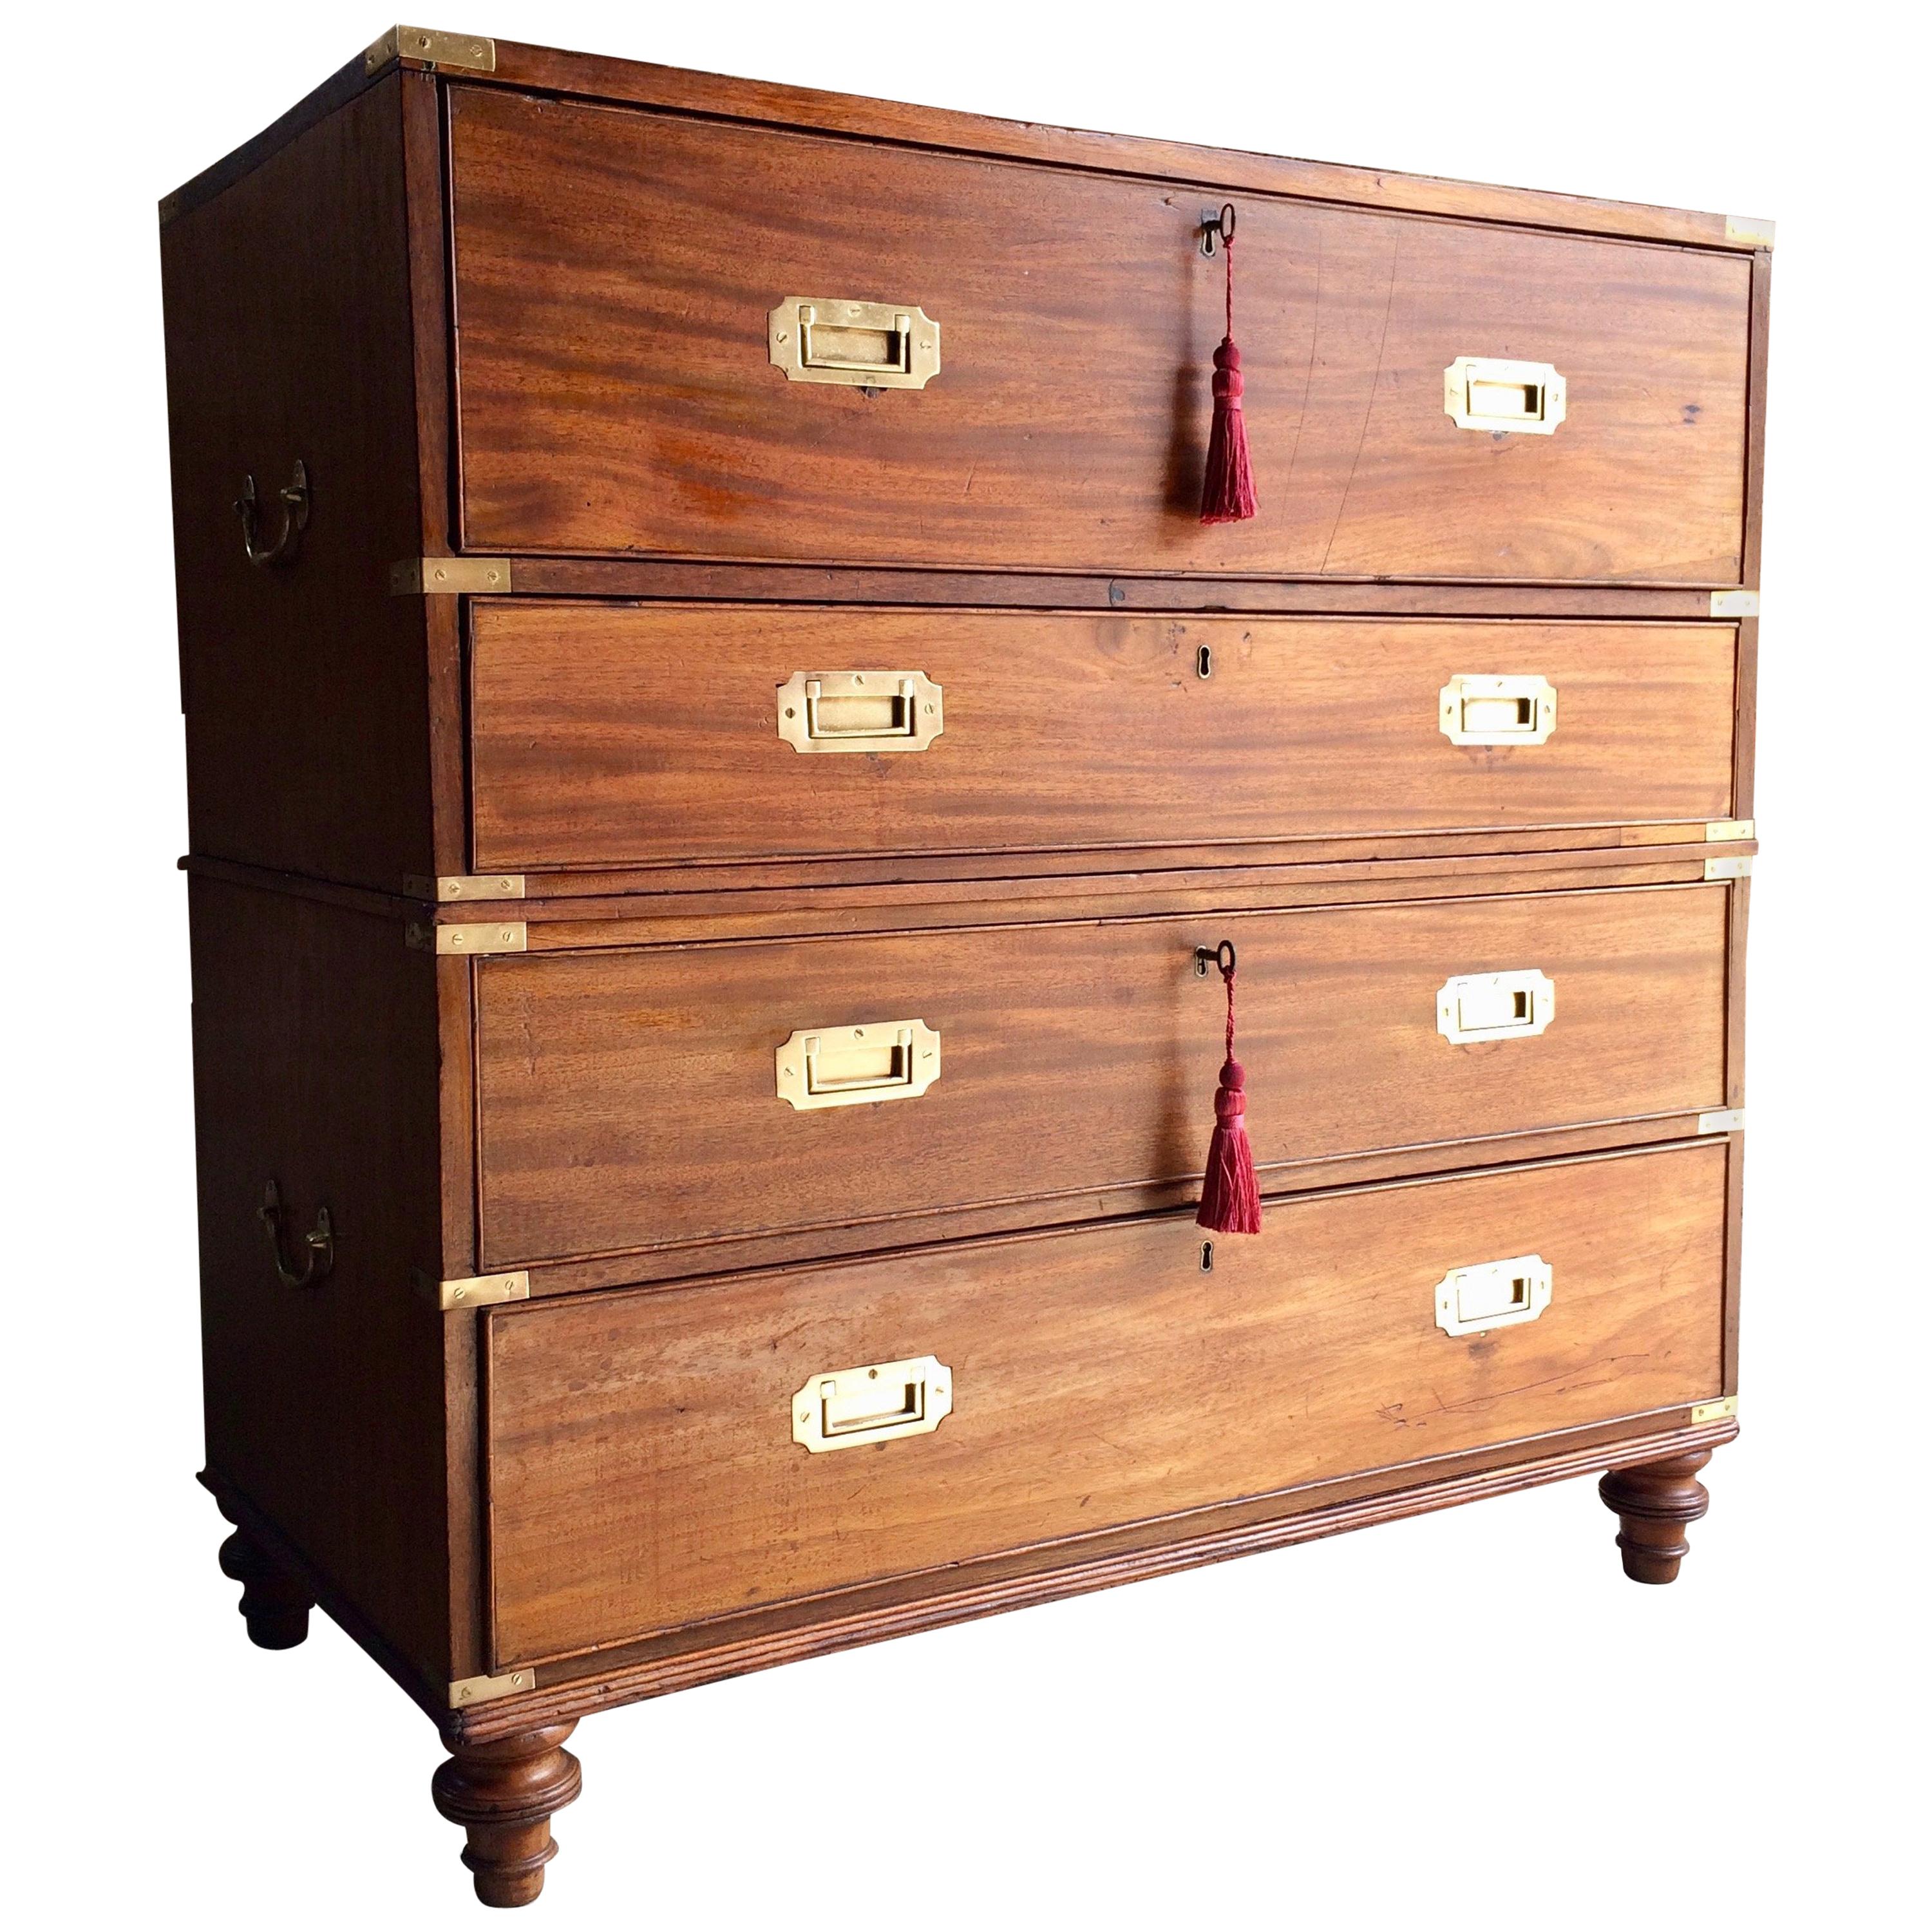 A magnificent and rare mid-19th century 'Gillows of Lancaster' two part Mahogany secretaire Campaign chest of drawers circa 1850, the upper section of the chest having a pullout / pull-out secretaire drawer enclosing a fully fitted interior with